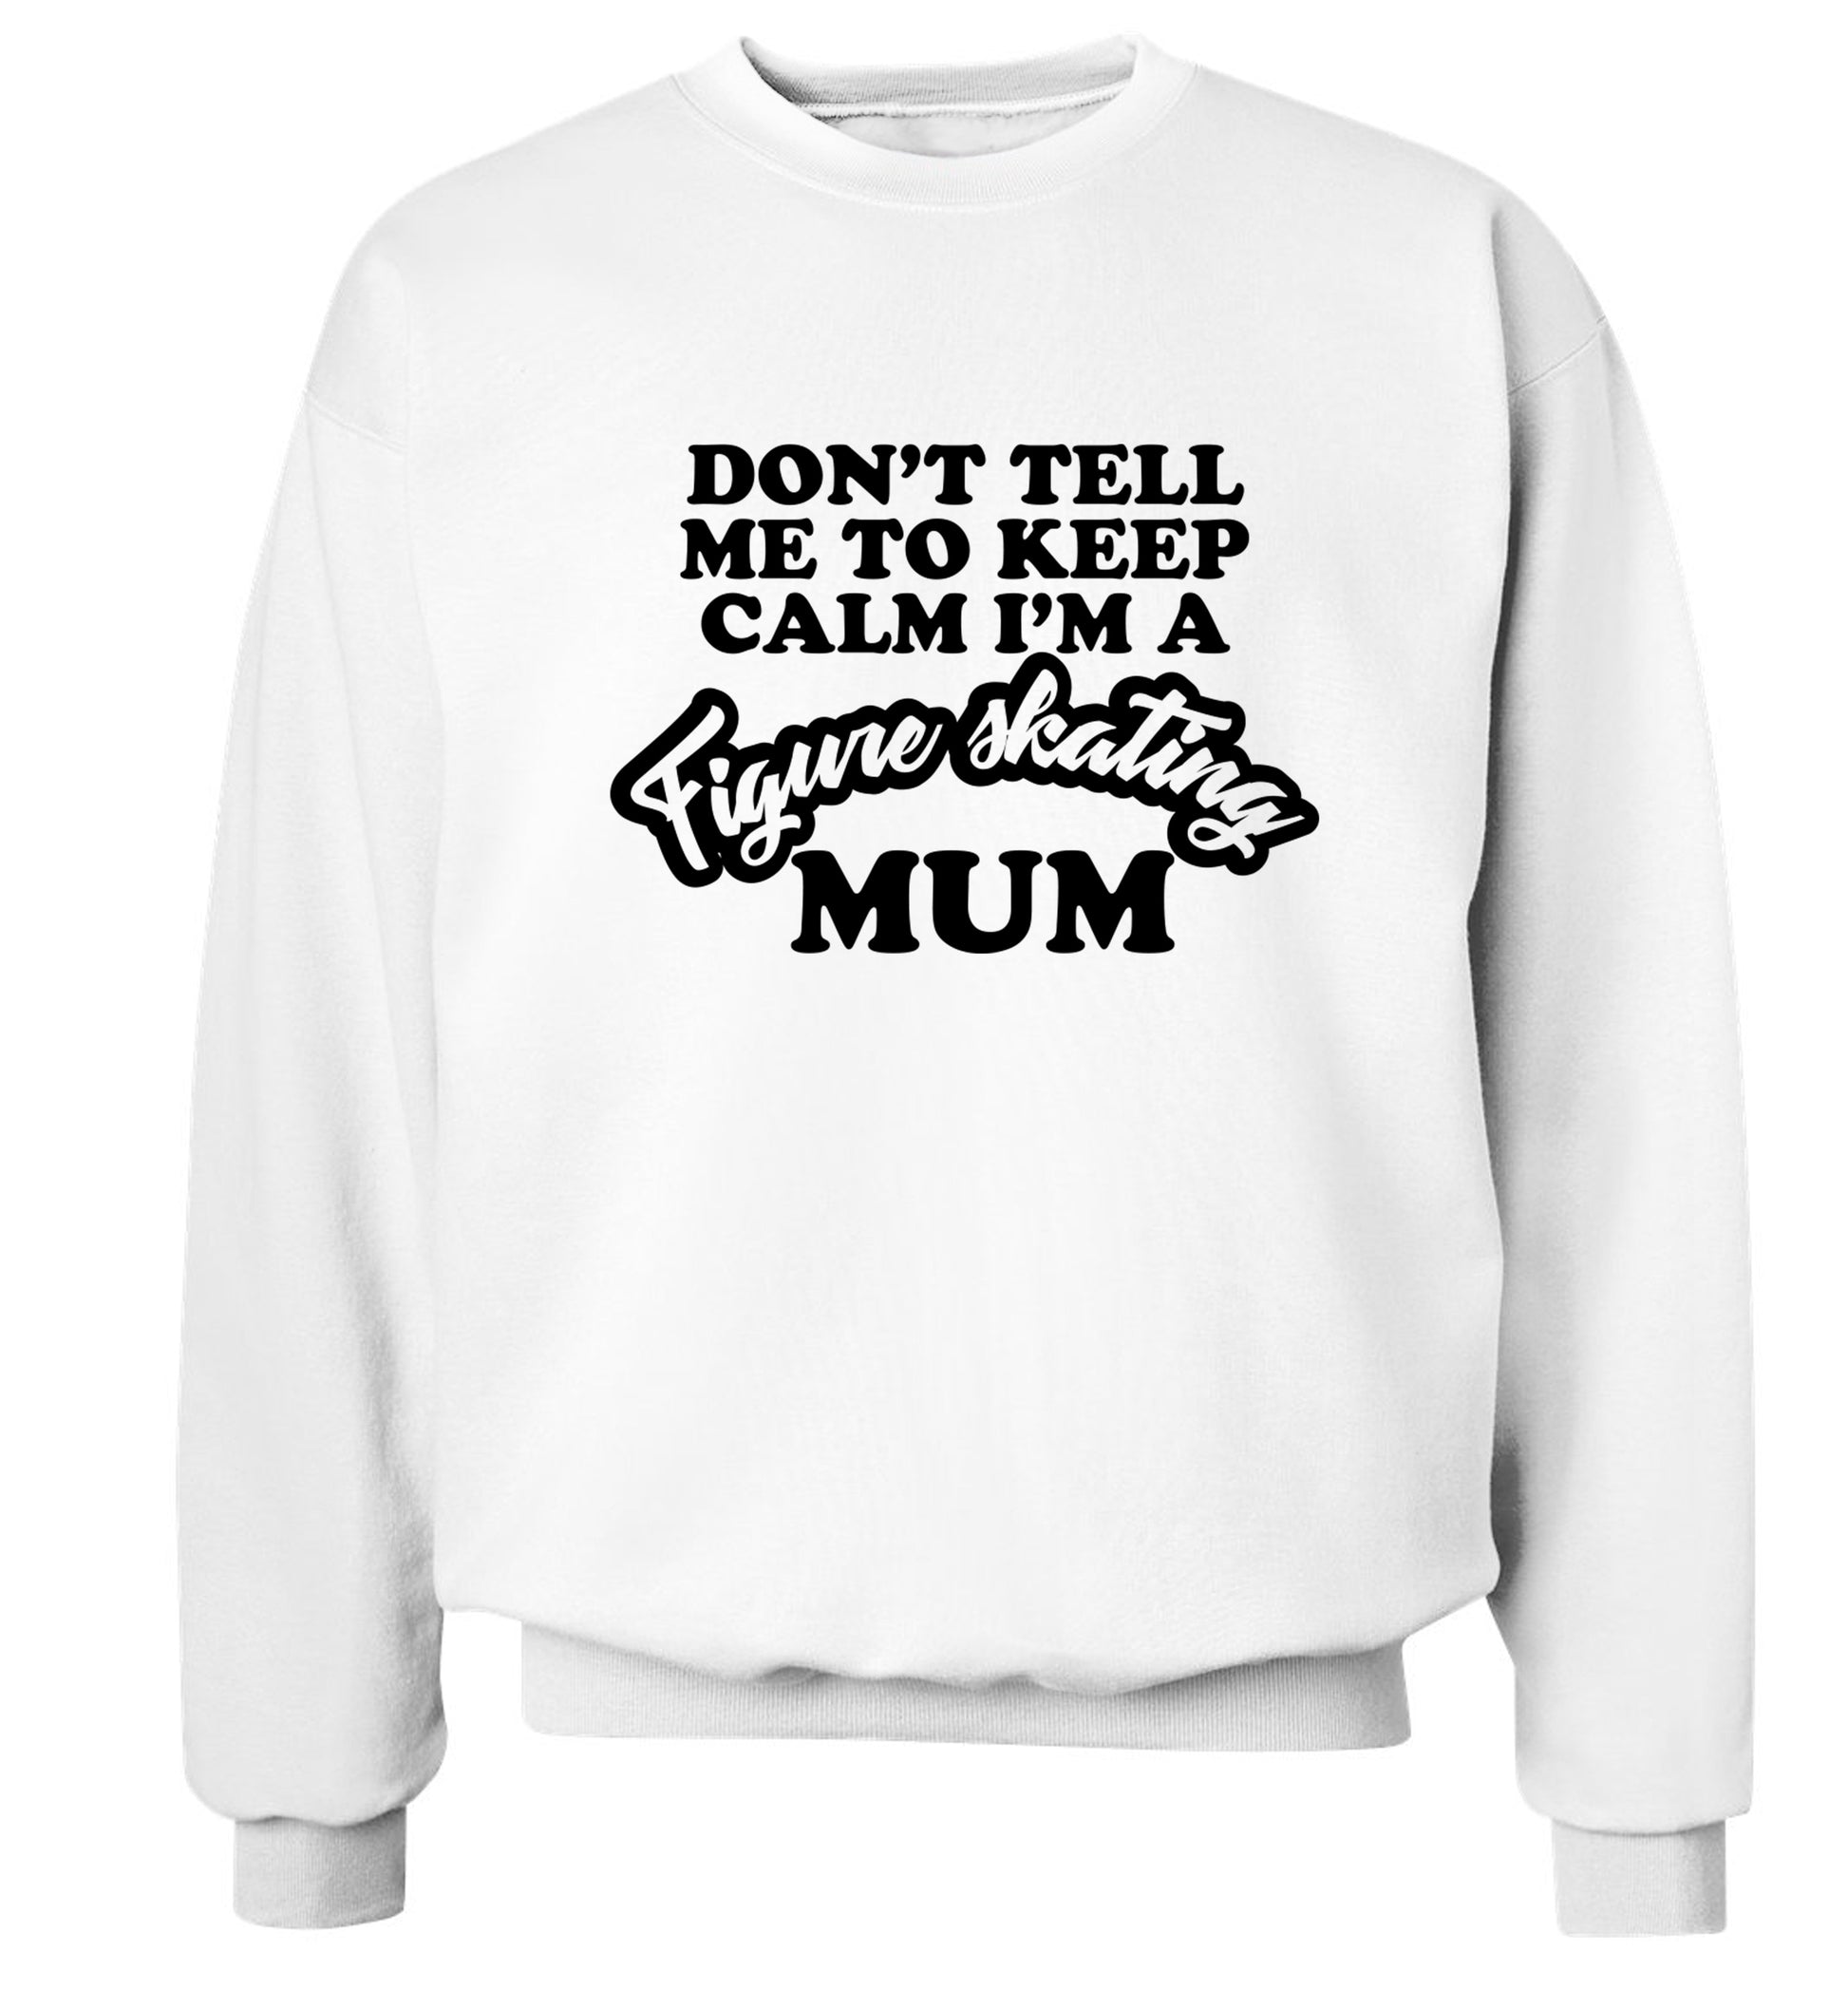 Don't tell me to keep calm I'm a figure skating mum Adult's unisexwhite Sweater 2XL